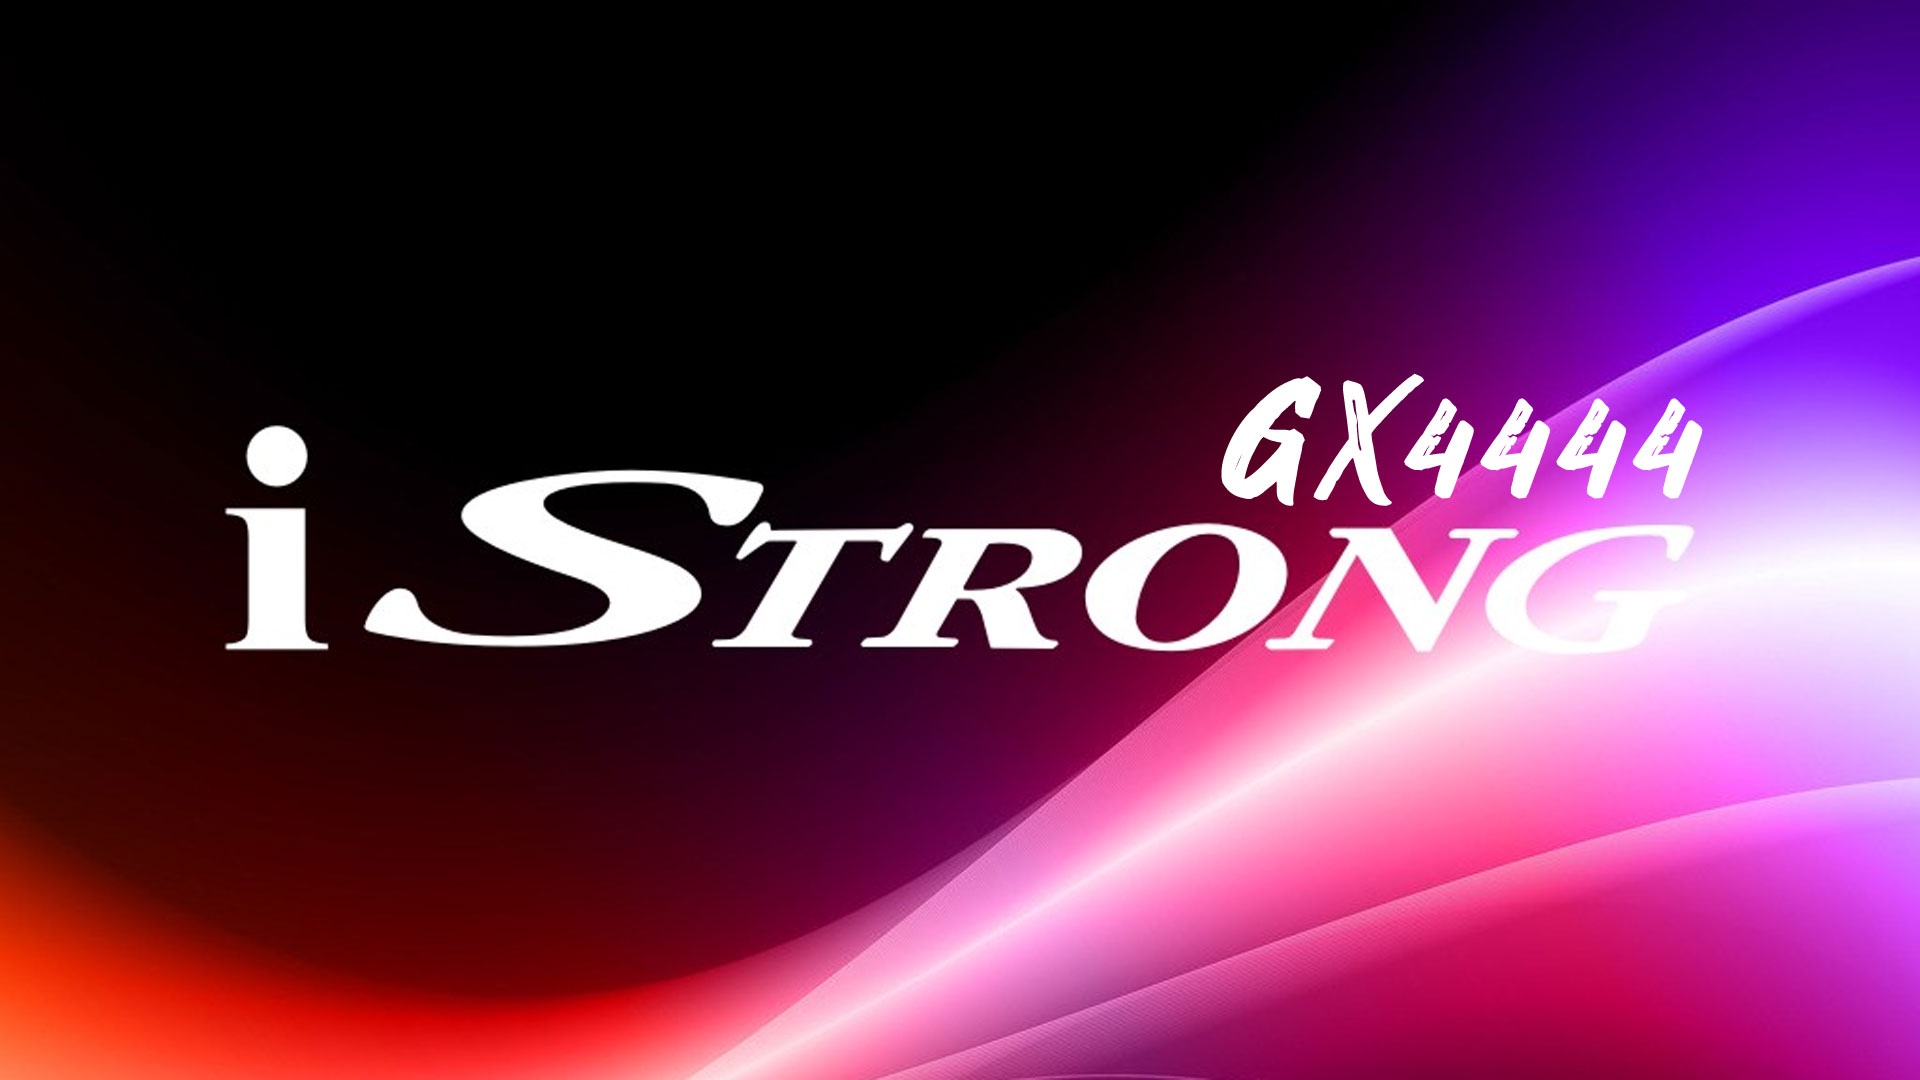 Download Software i Strong GX 4444 HD New Update Firmware Receiver